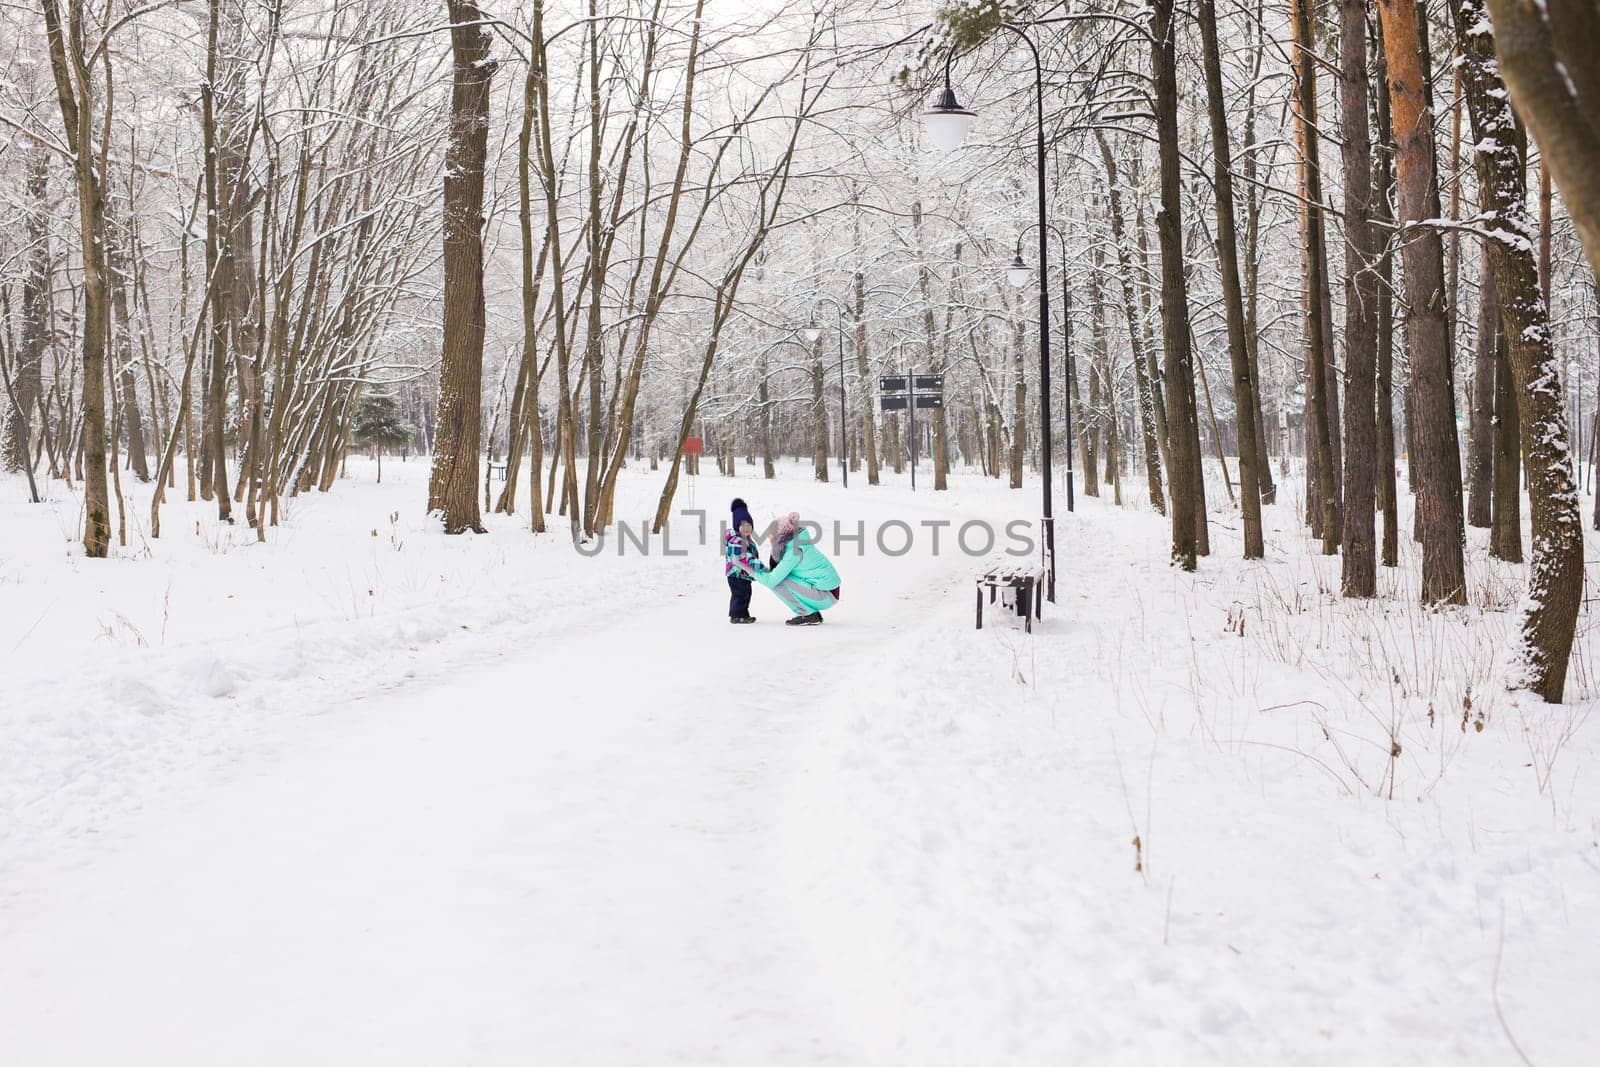 happy mother and baby in winter park. family outdoors. cheerful mommy with her child.